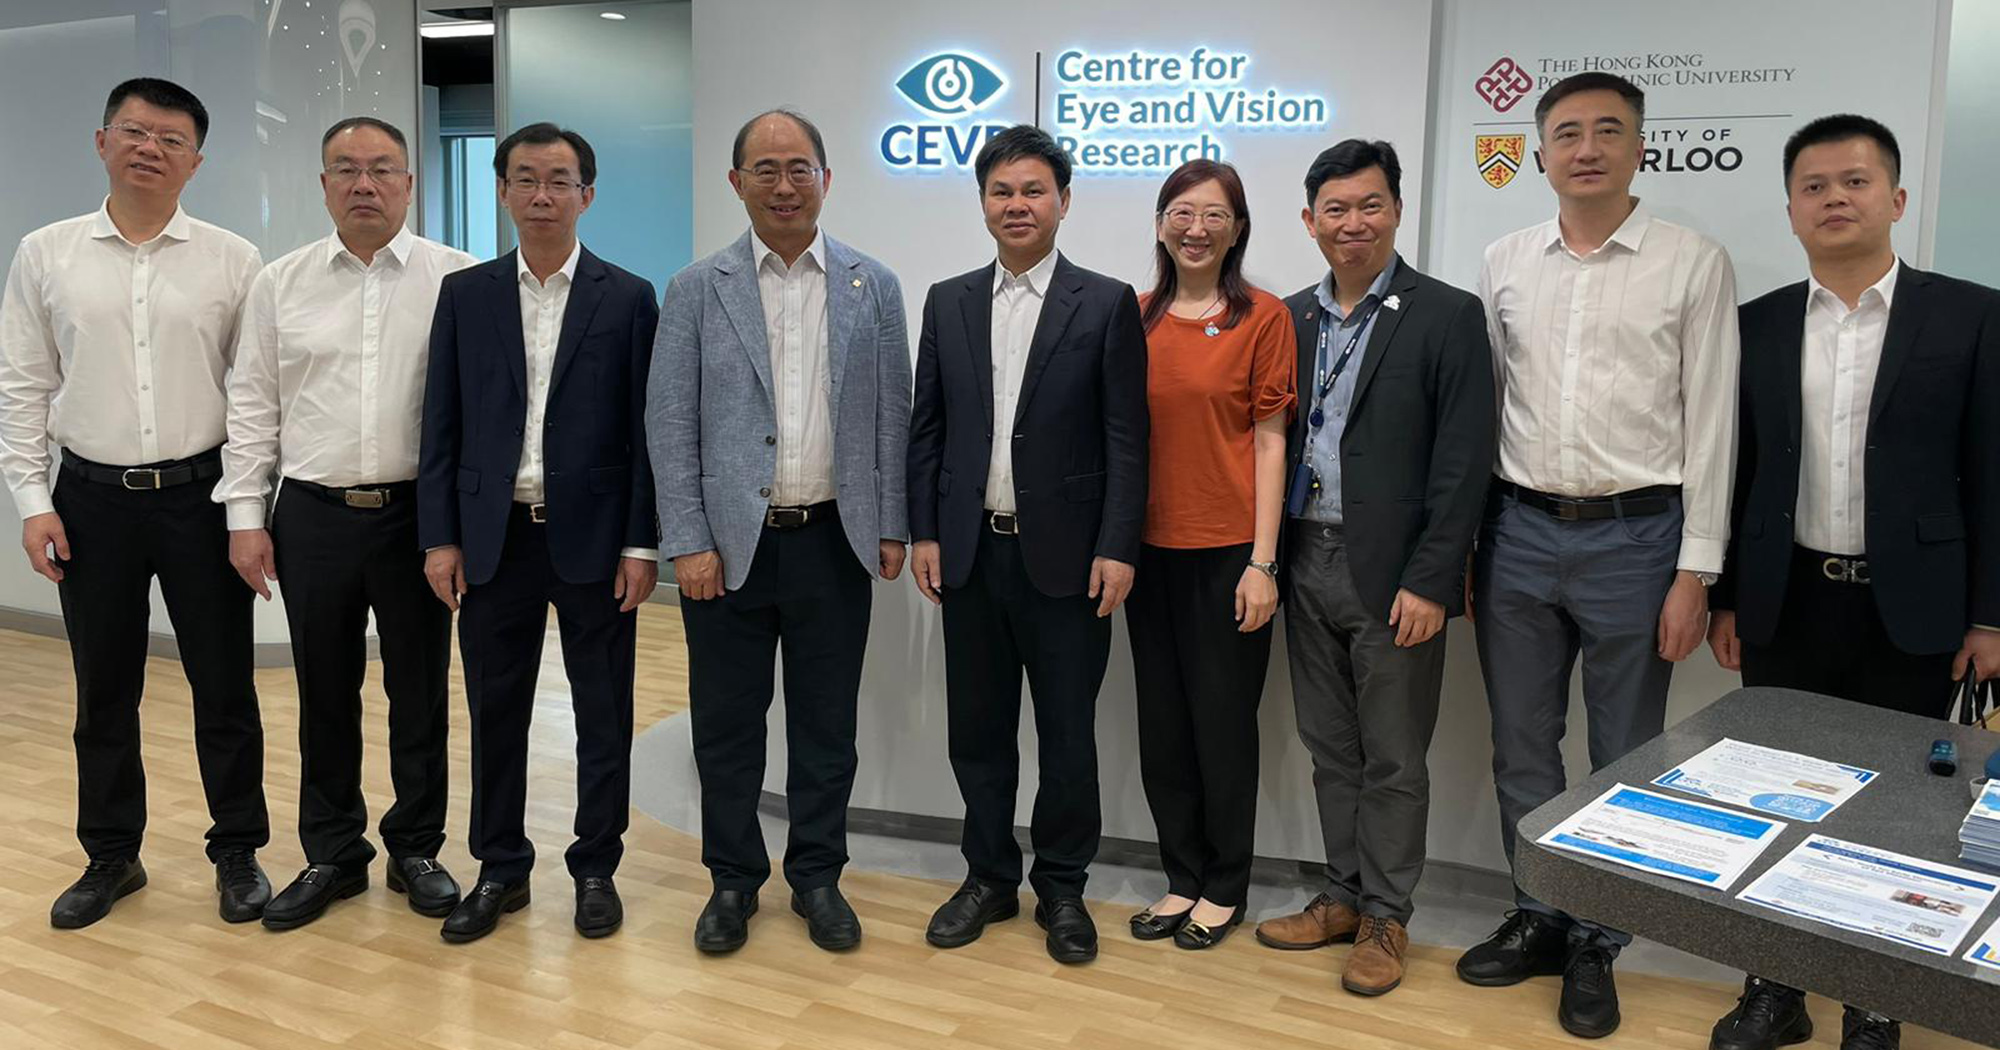 On 26 June, Mr Zhang Wenxian, Member of the Standing Committee of the Communist Party of Quanzhou Municipal Committee and Communist Party Secretary of Jinjiang Committee (middle), led a delegation to visit the Centre for Eye and Vision Research at the Hong Kong Science Park. The research centre is co-founded by the University and world-leading institutions under the InnoHK initiative.